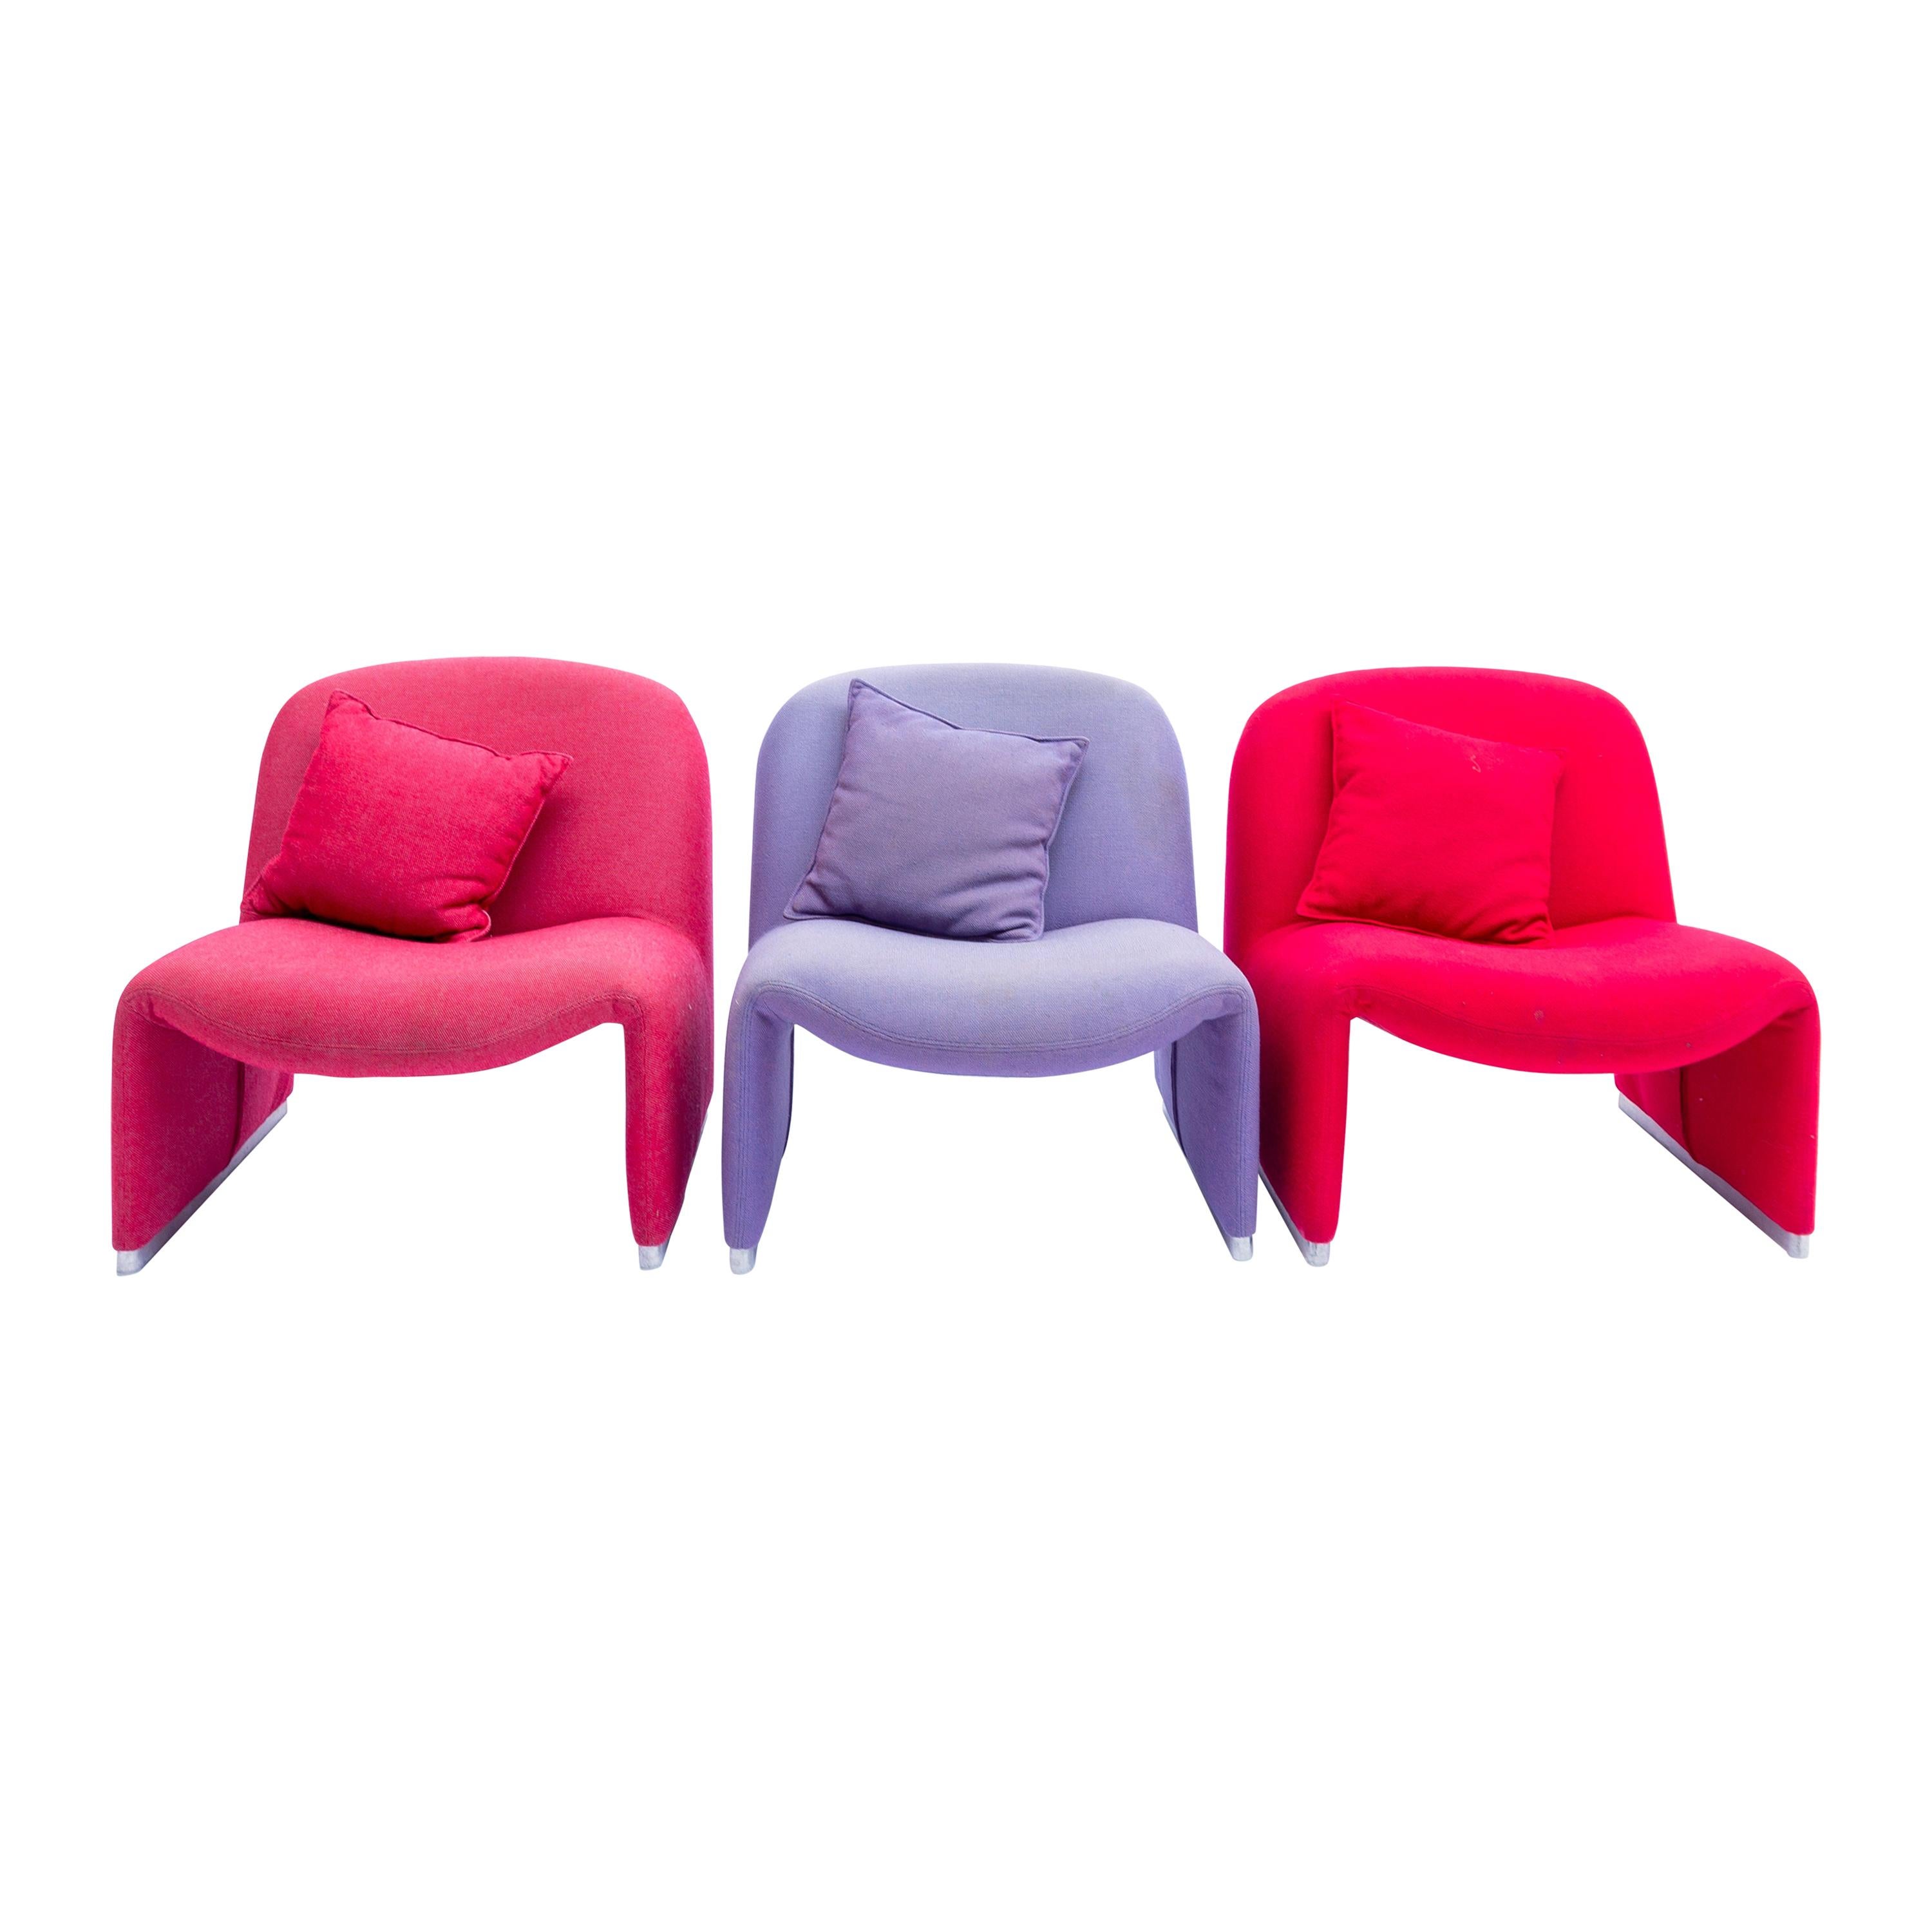 Set of Three ‘Alky Chairs’ by Giancarlo Piretti for Castelli, Italy, 1970s